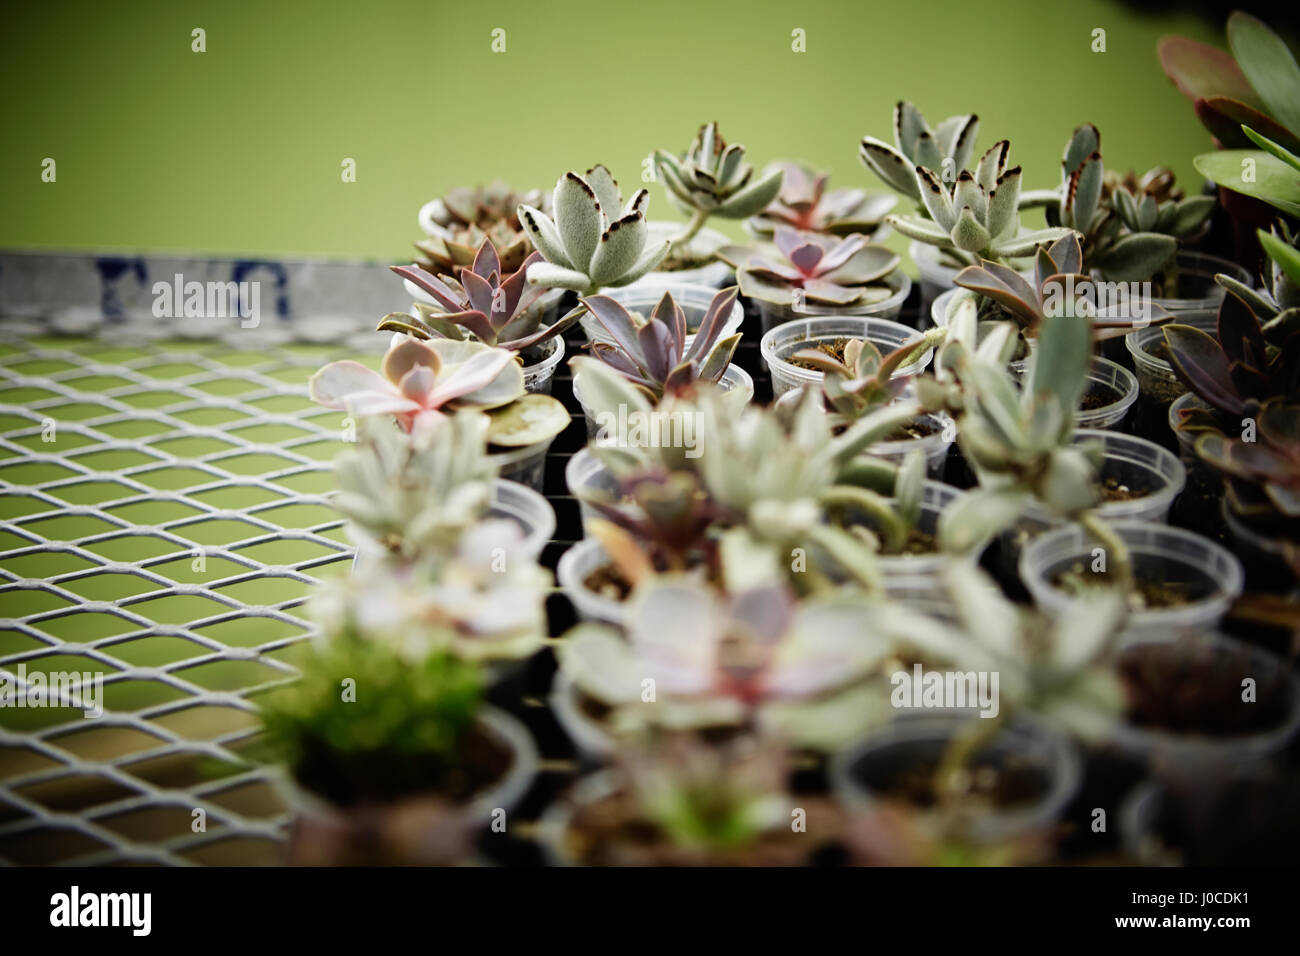 Pots of succulent plants on wire rack Stock Photo